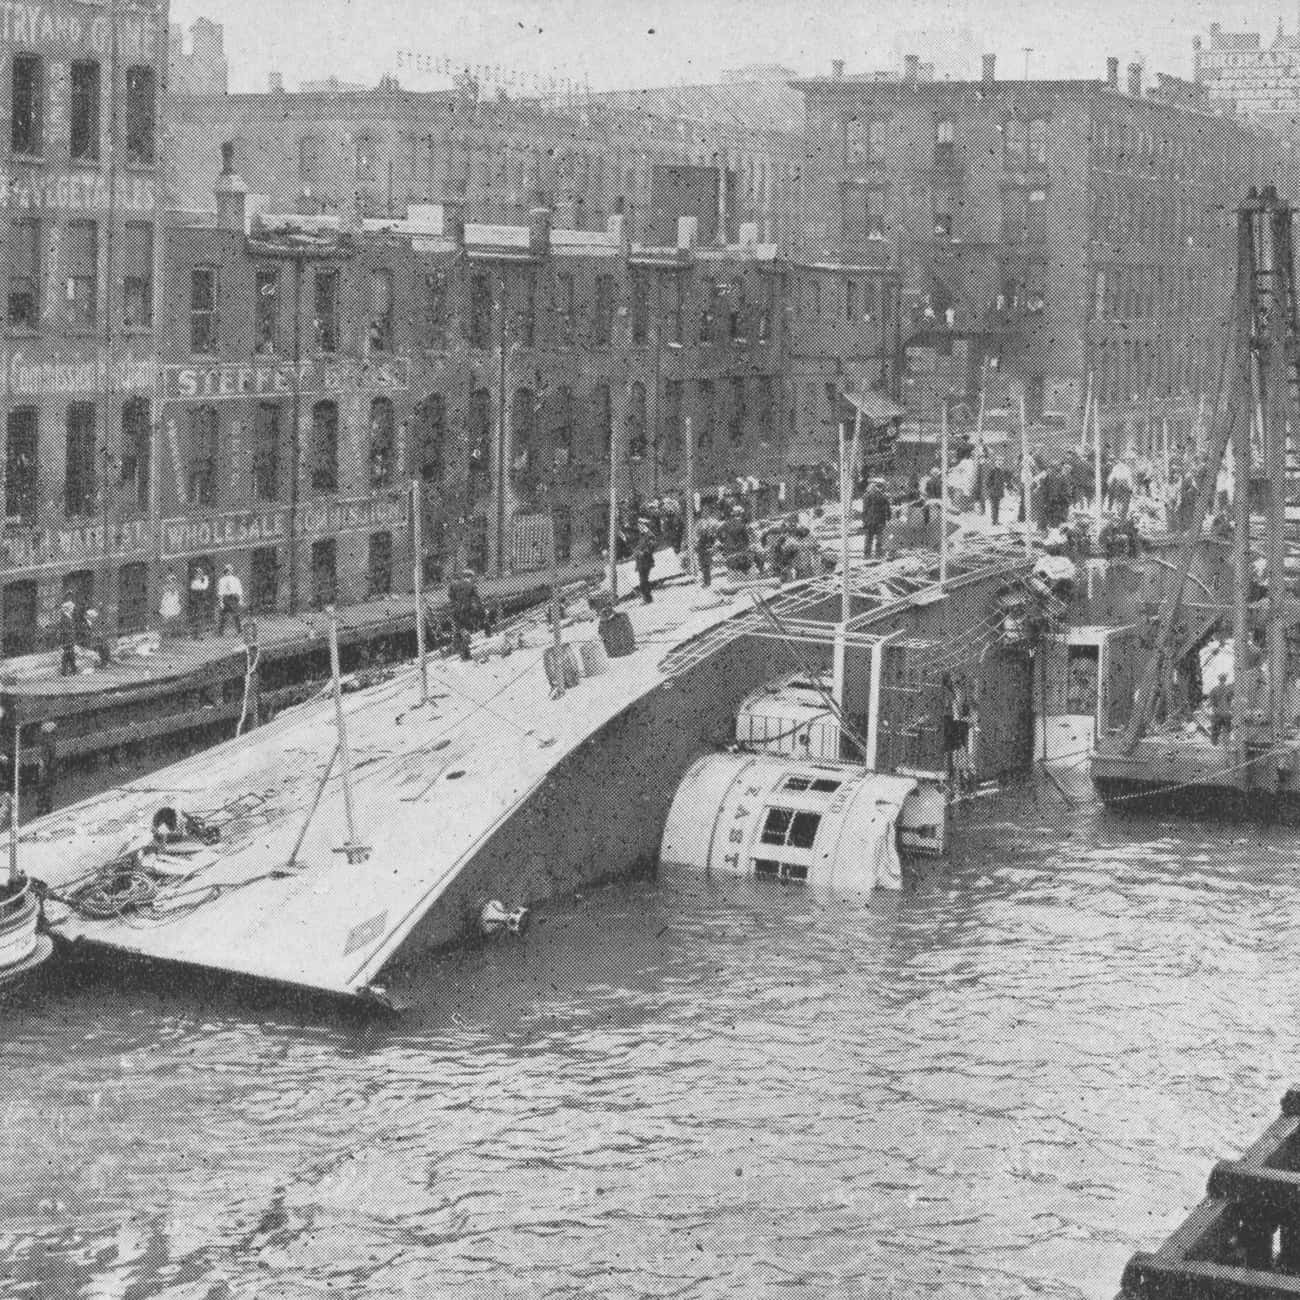 S. S. Eastland: Tipped Over At Port